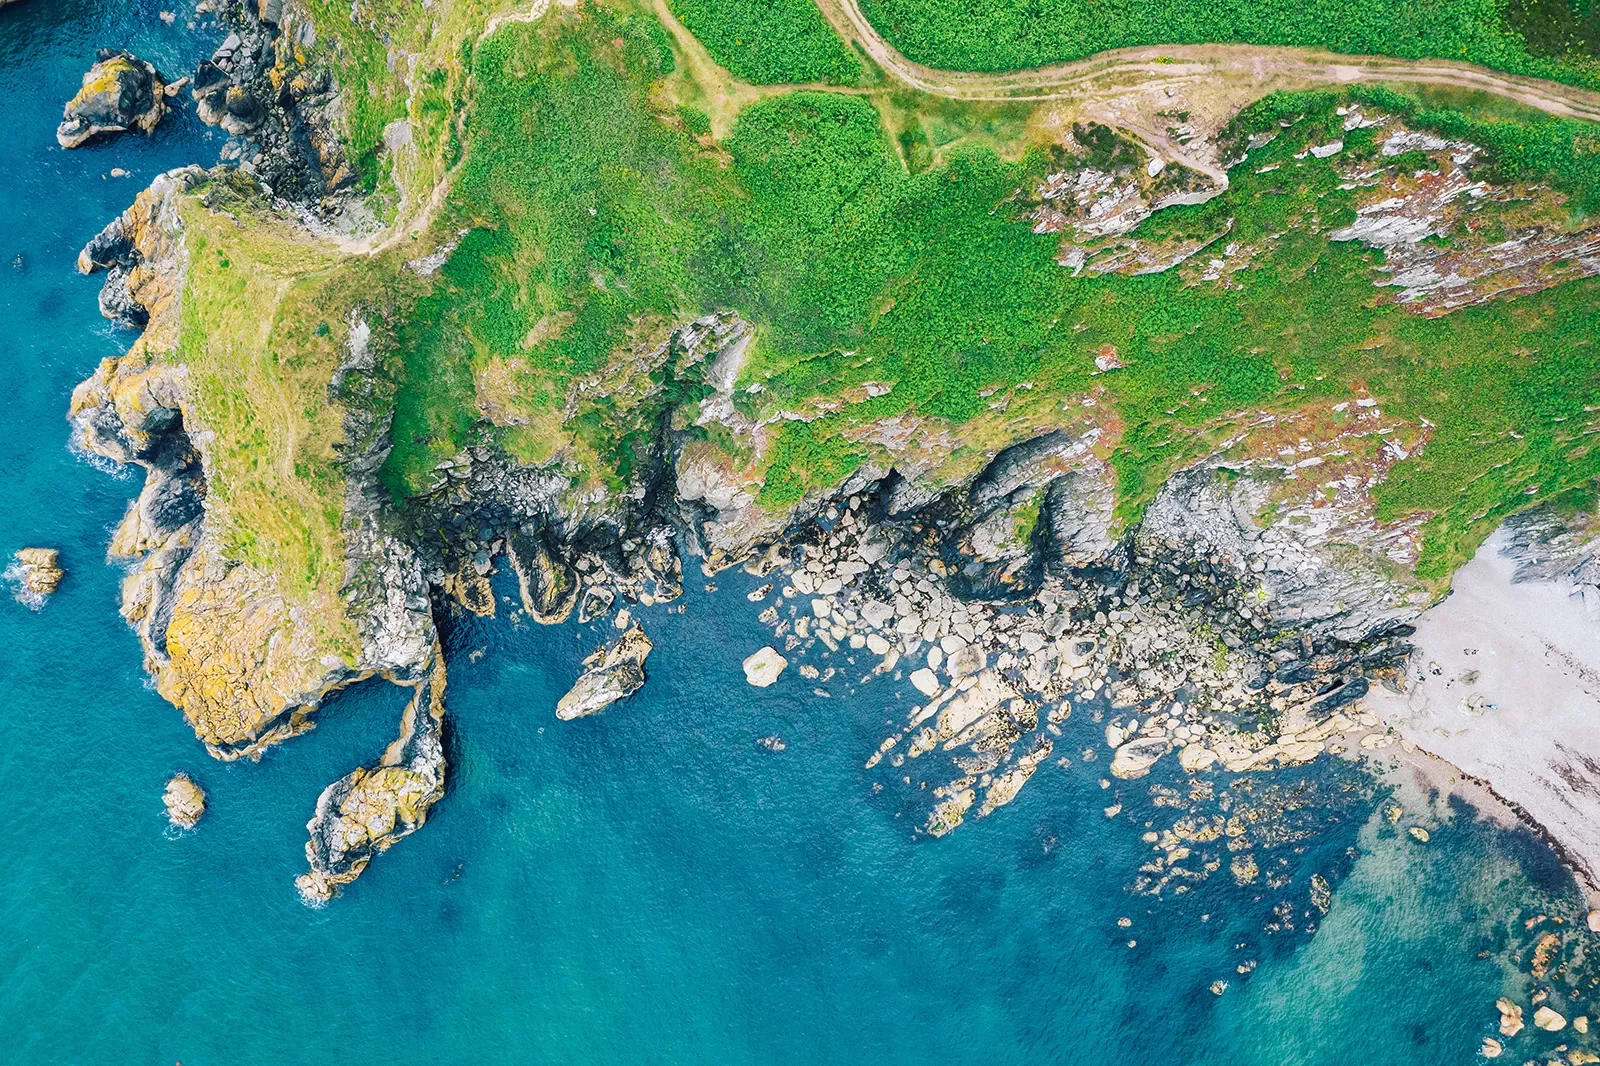 Sky view of a coast next to the ocean